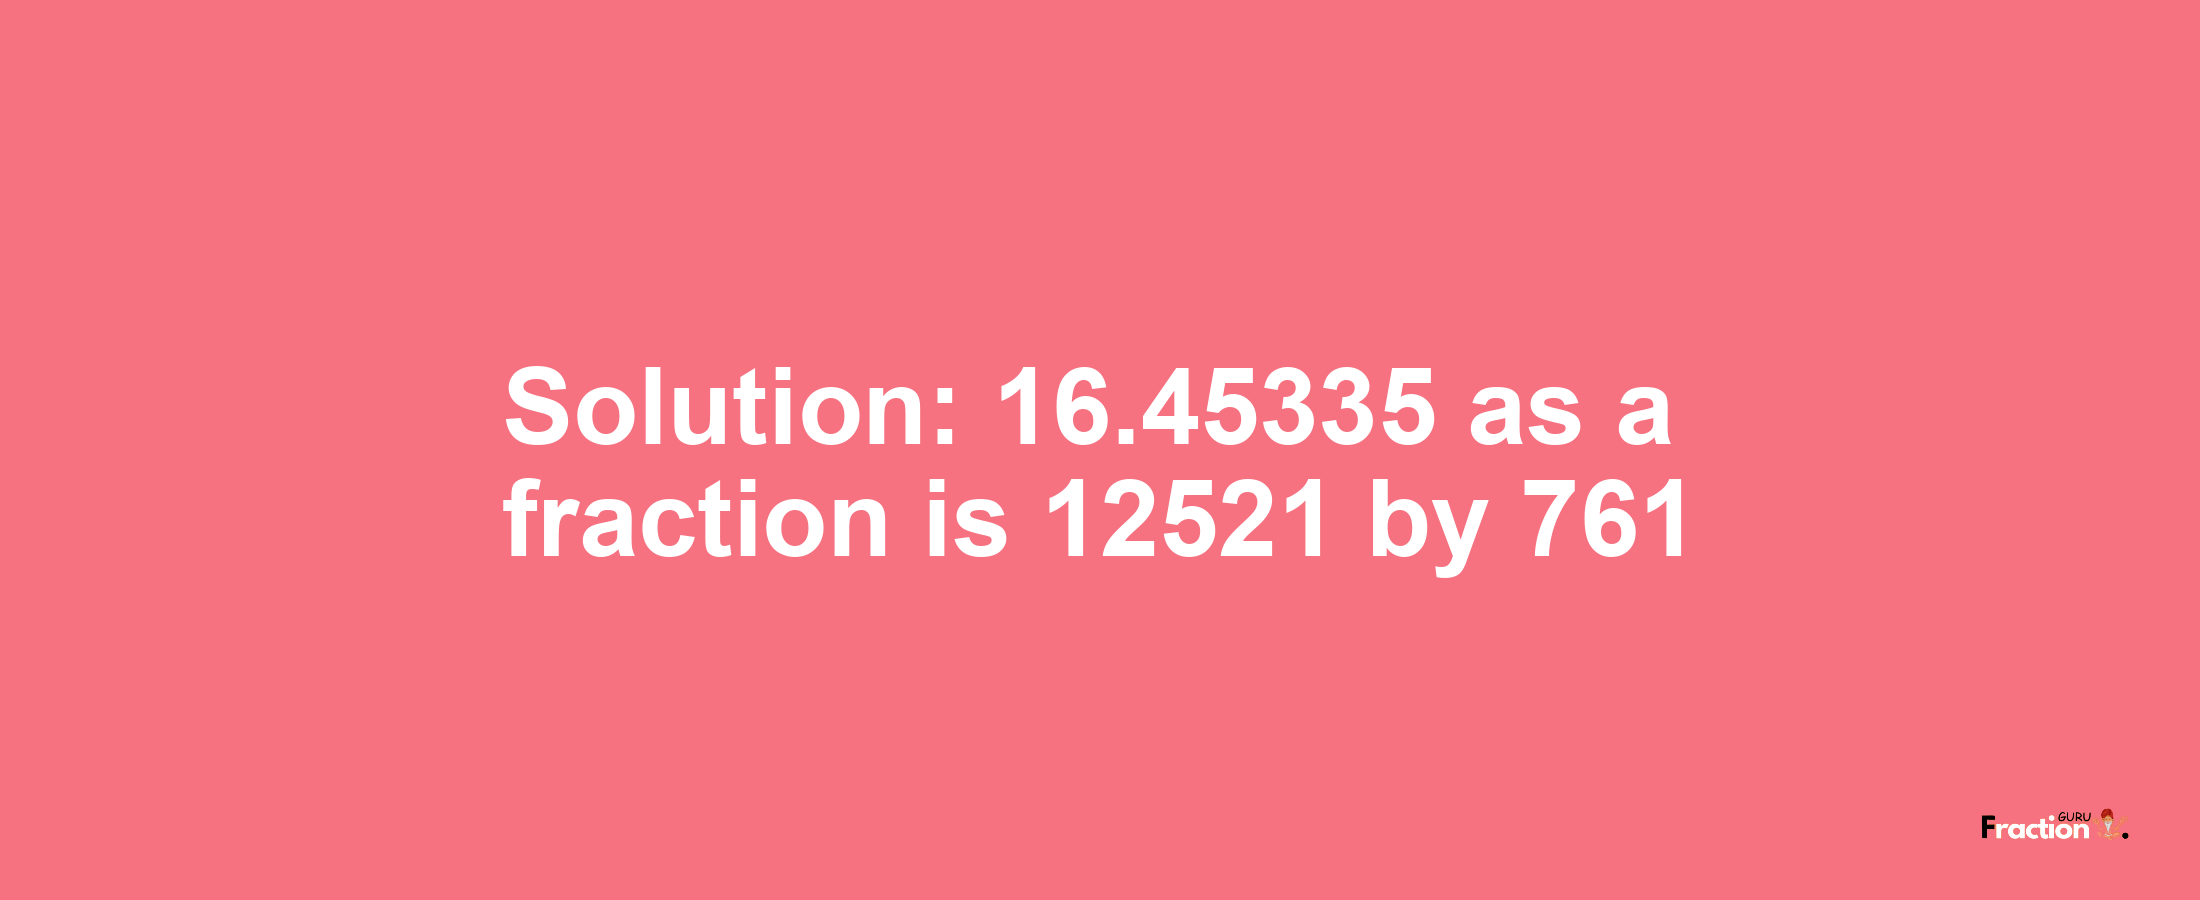 Solution:16.45335 as a fraction is 12521/761